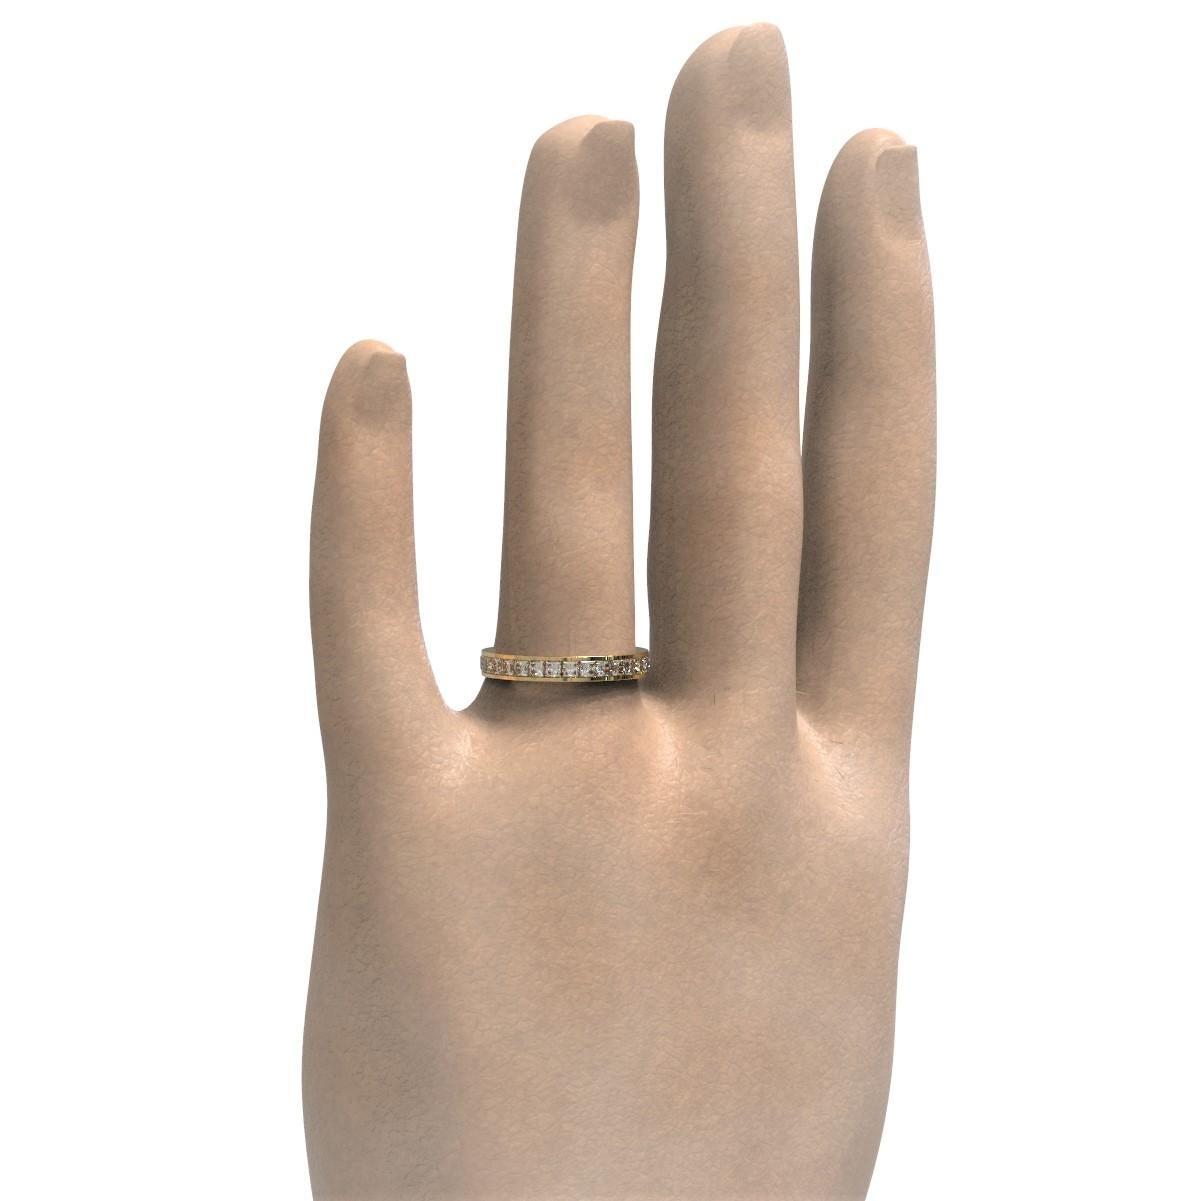 The Princess

This stunning 18 carat yellow gold ring set with thirty beautiful calibrated princess cut diamonds all the way around, this lovely band is well suited as a dress, wedding or other special commitment ring.

Princess cut diamonds: F